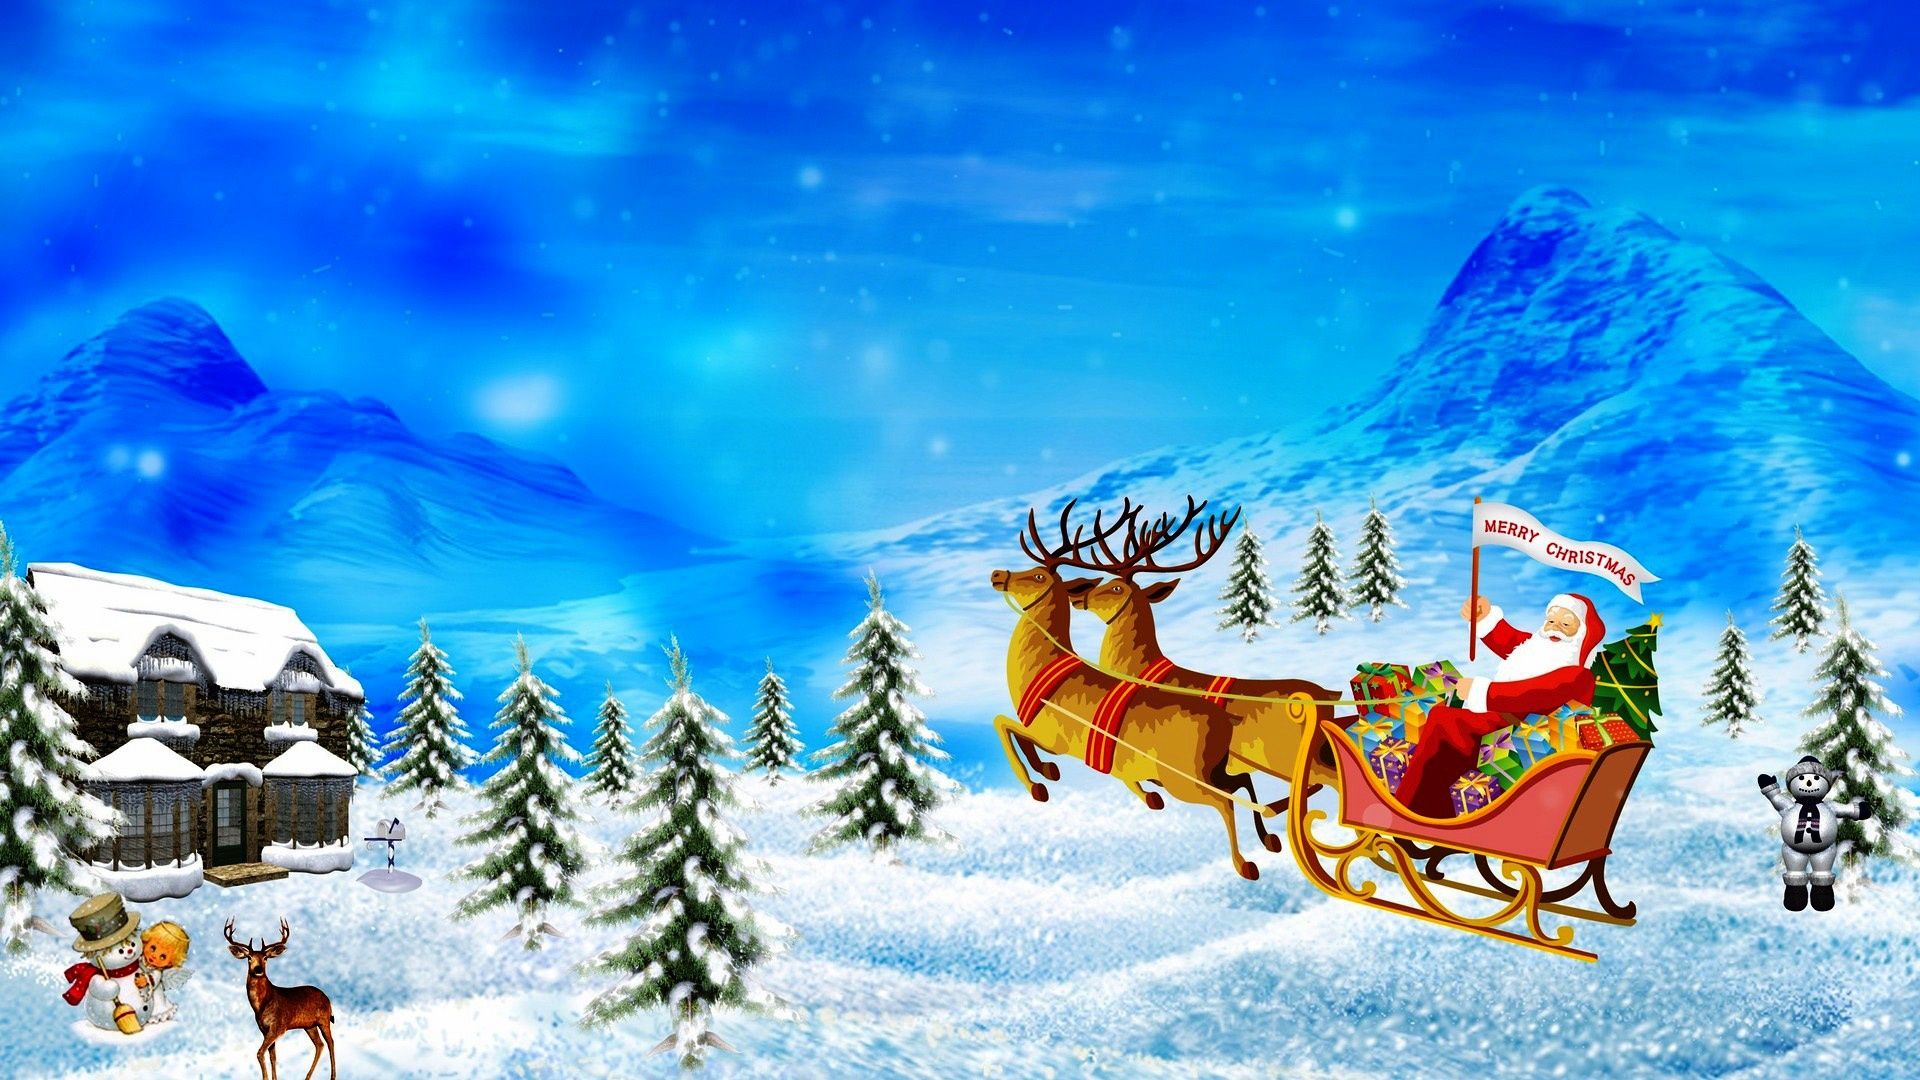 download santa claus is coming to town wallpaper gratuit wallpapers